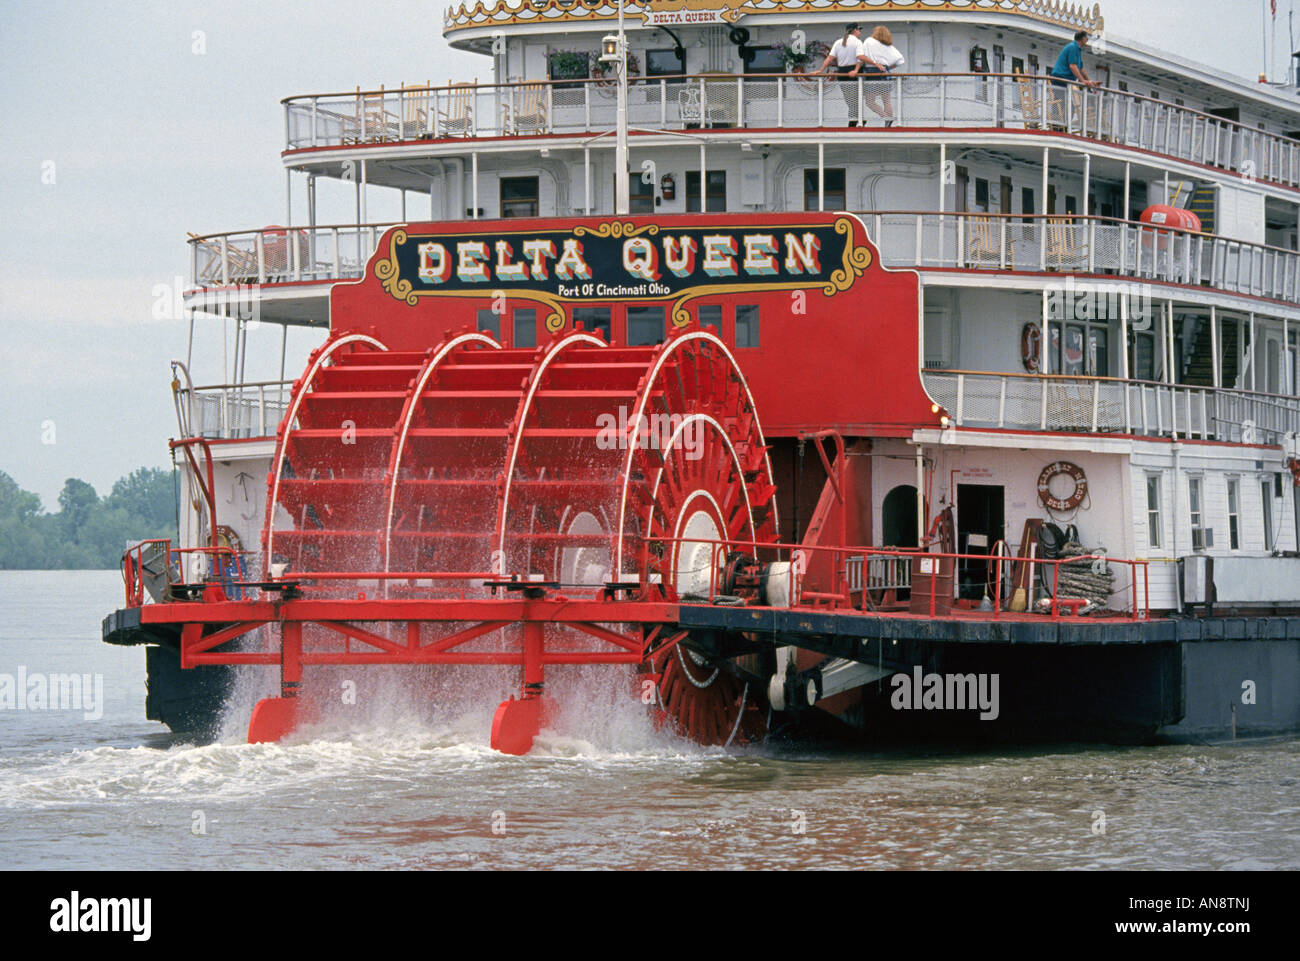 a-view-of-the-paddlewheel-steamboat-delta-queen-on-the-mississippi-AN8TNJ.jpg